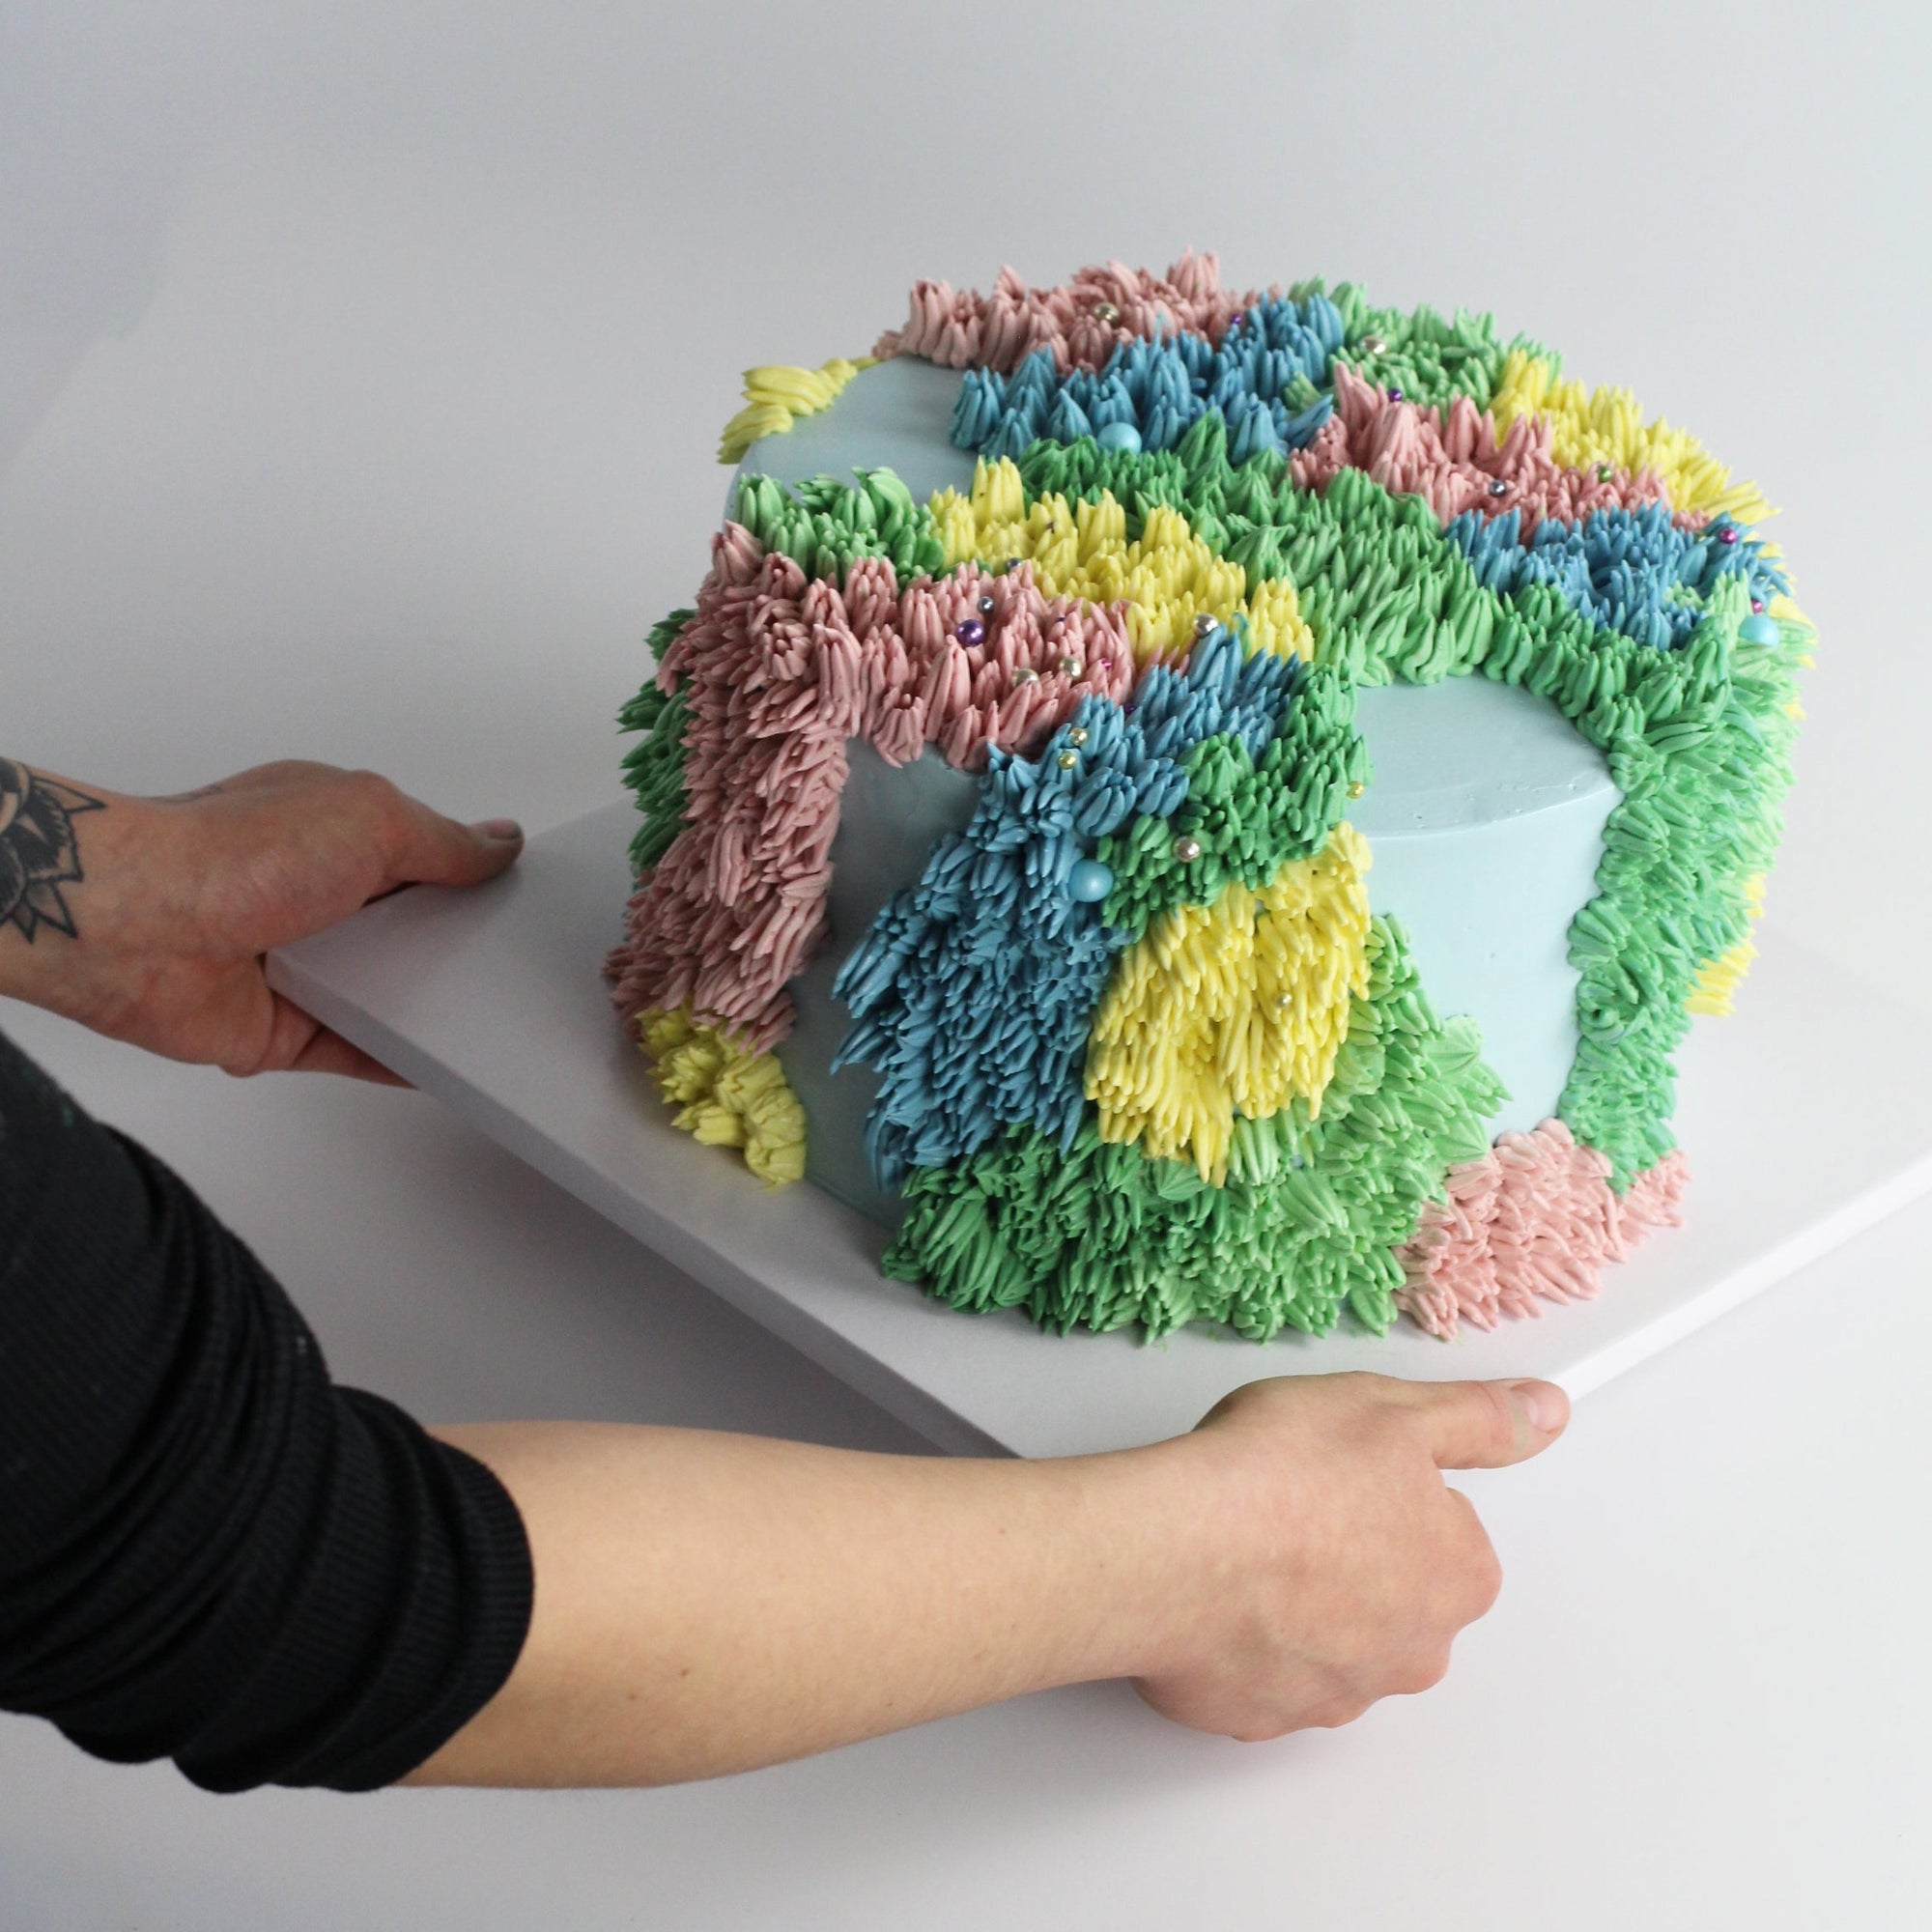 The colorful Shag Cake is designed to bring fun to any gathering.